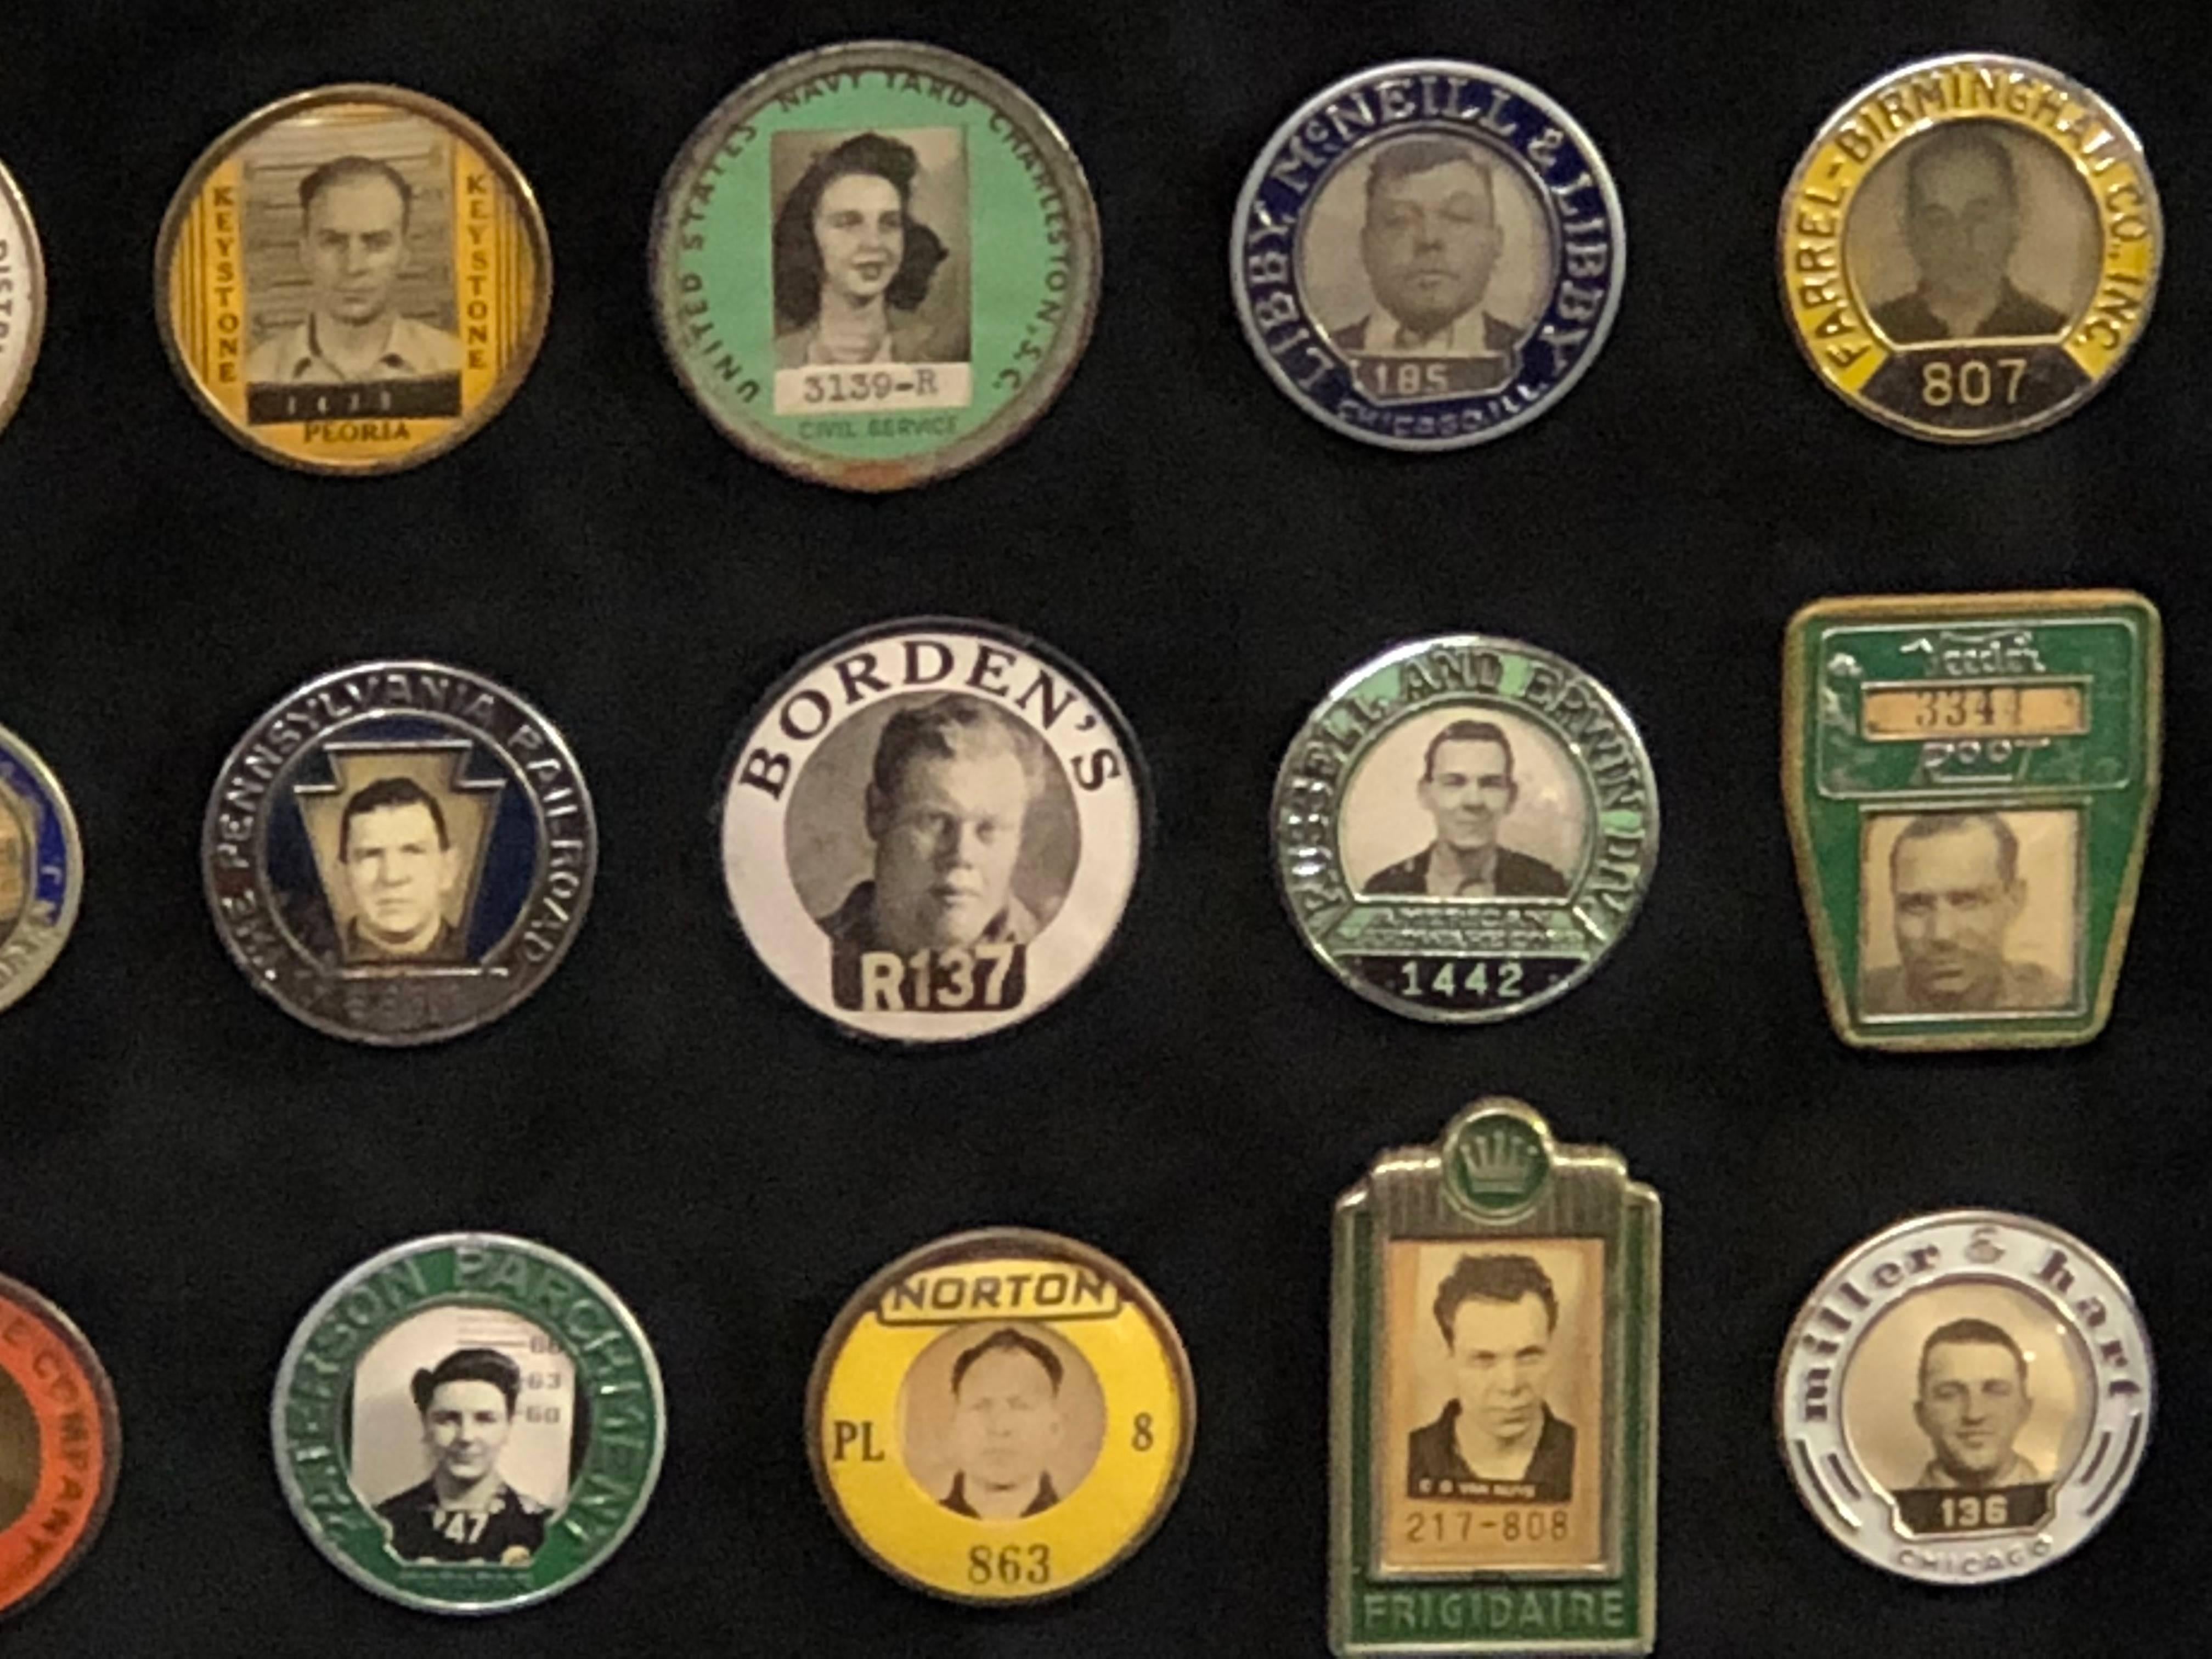 20th Century Collection of Antique Employee Badges Professionally Set in Museum Quality Frame